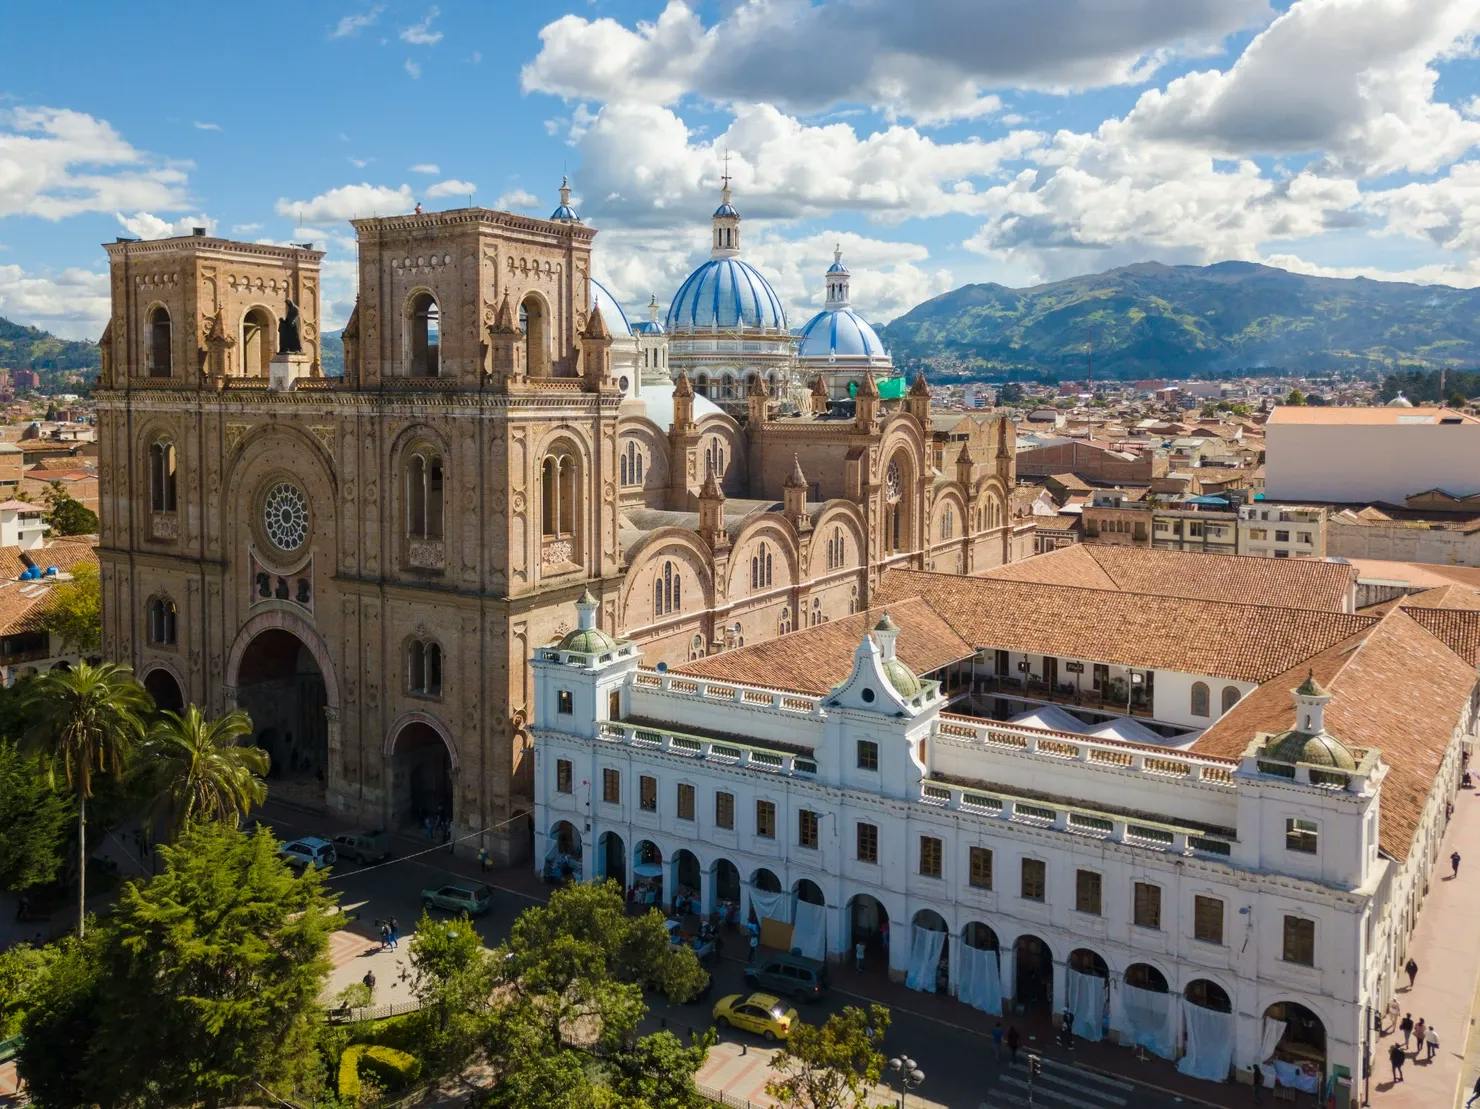 Cathedral of the Immaculate Conception, Cuenca Ecuador